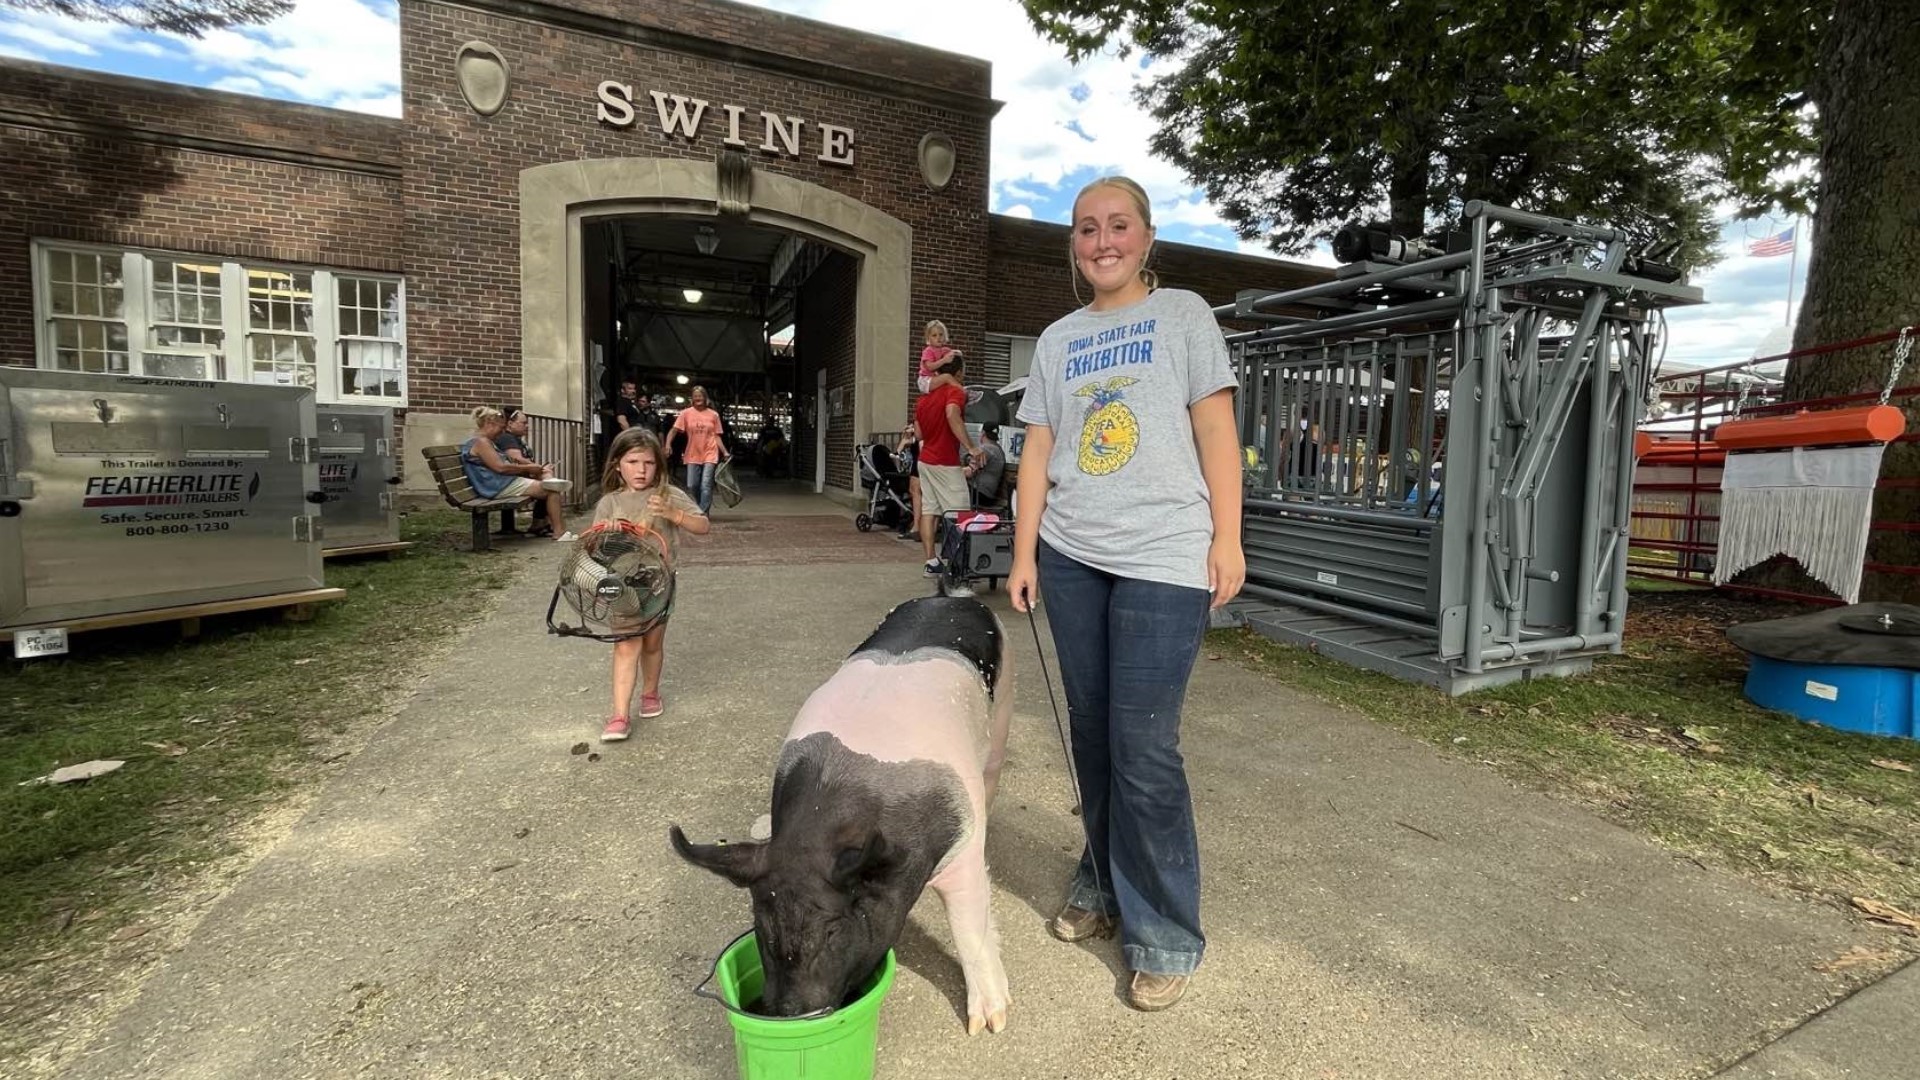 Lots of Iowans come to the state fair to check out the animals, but have you wondered who's in charge of scooping all the manure? Here's their story.